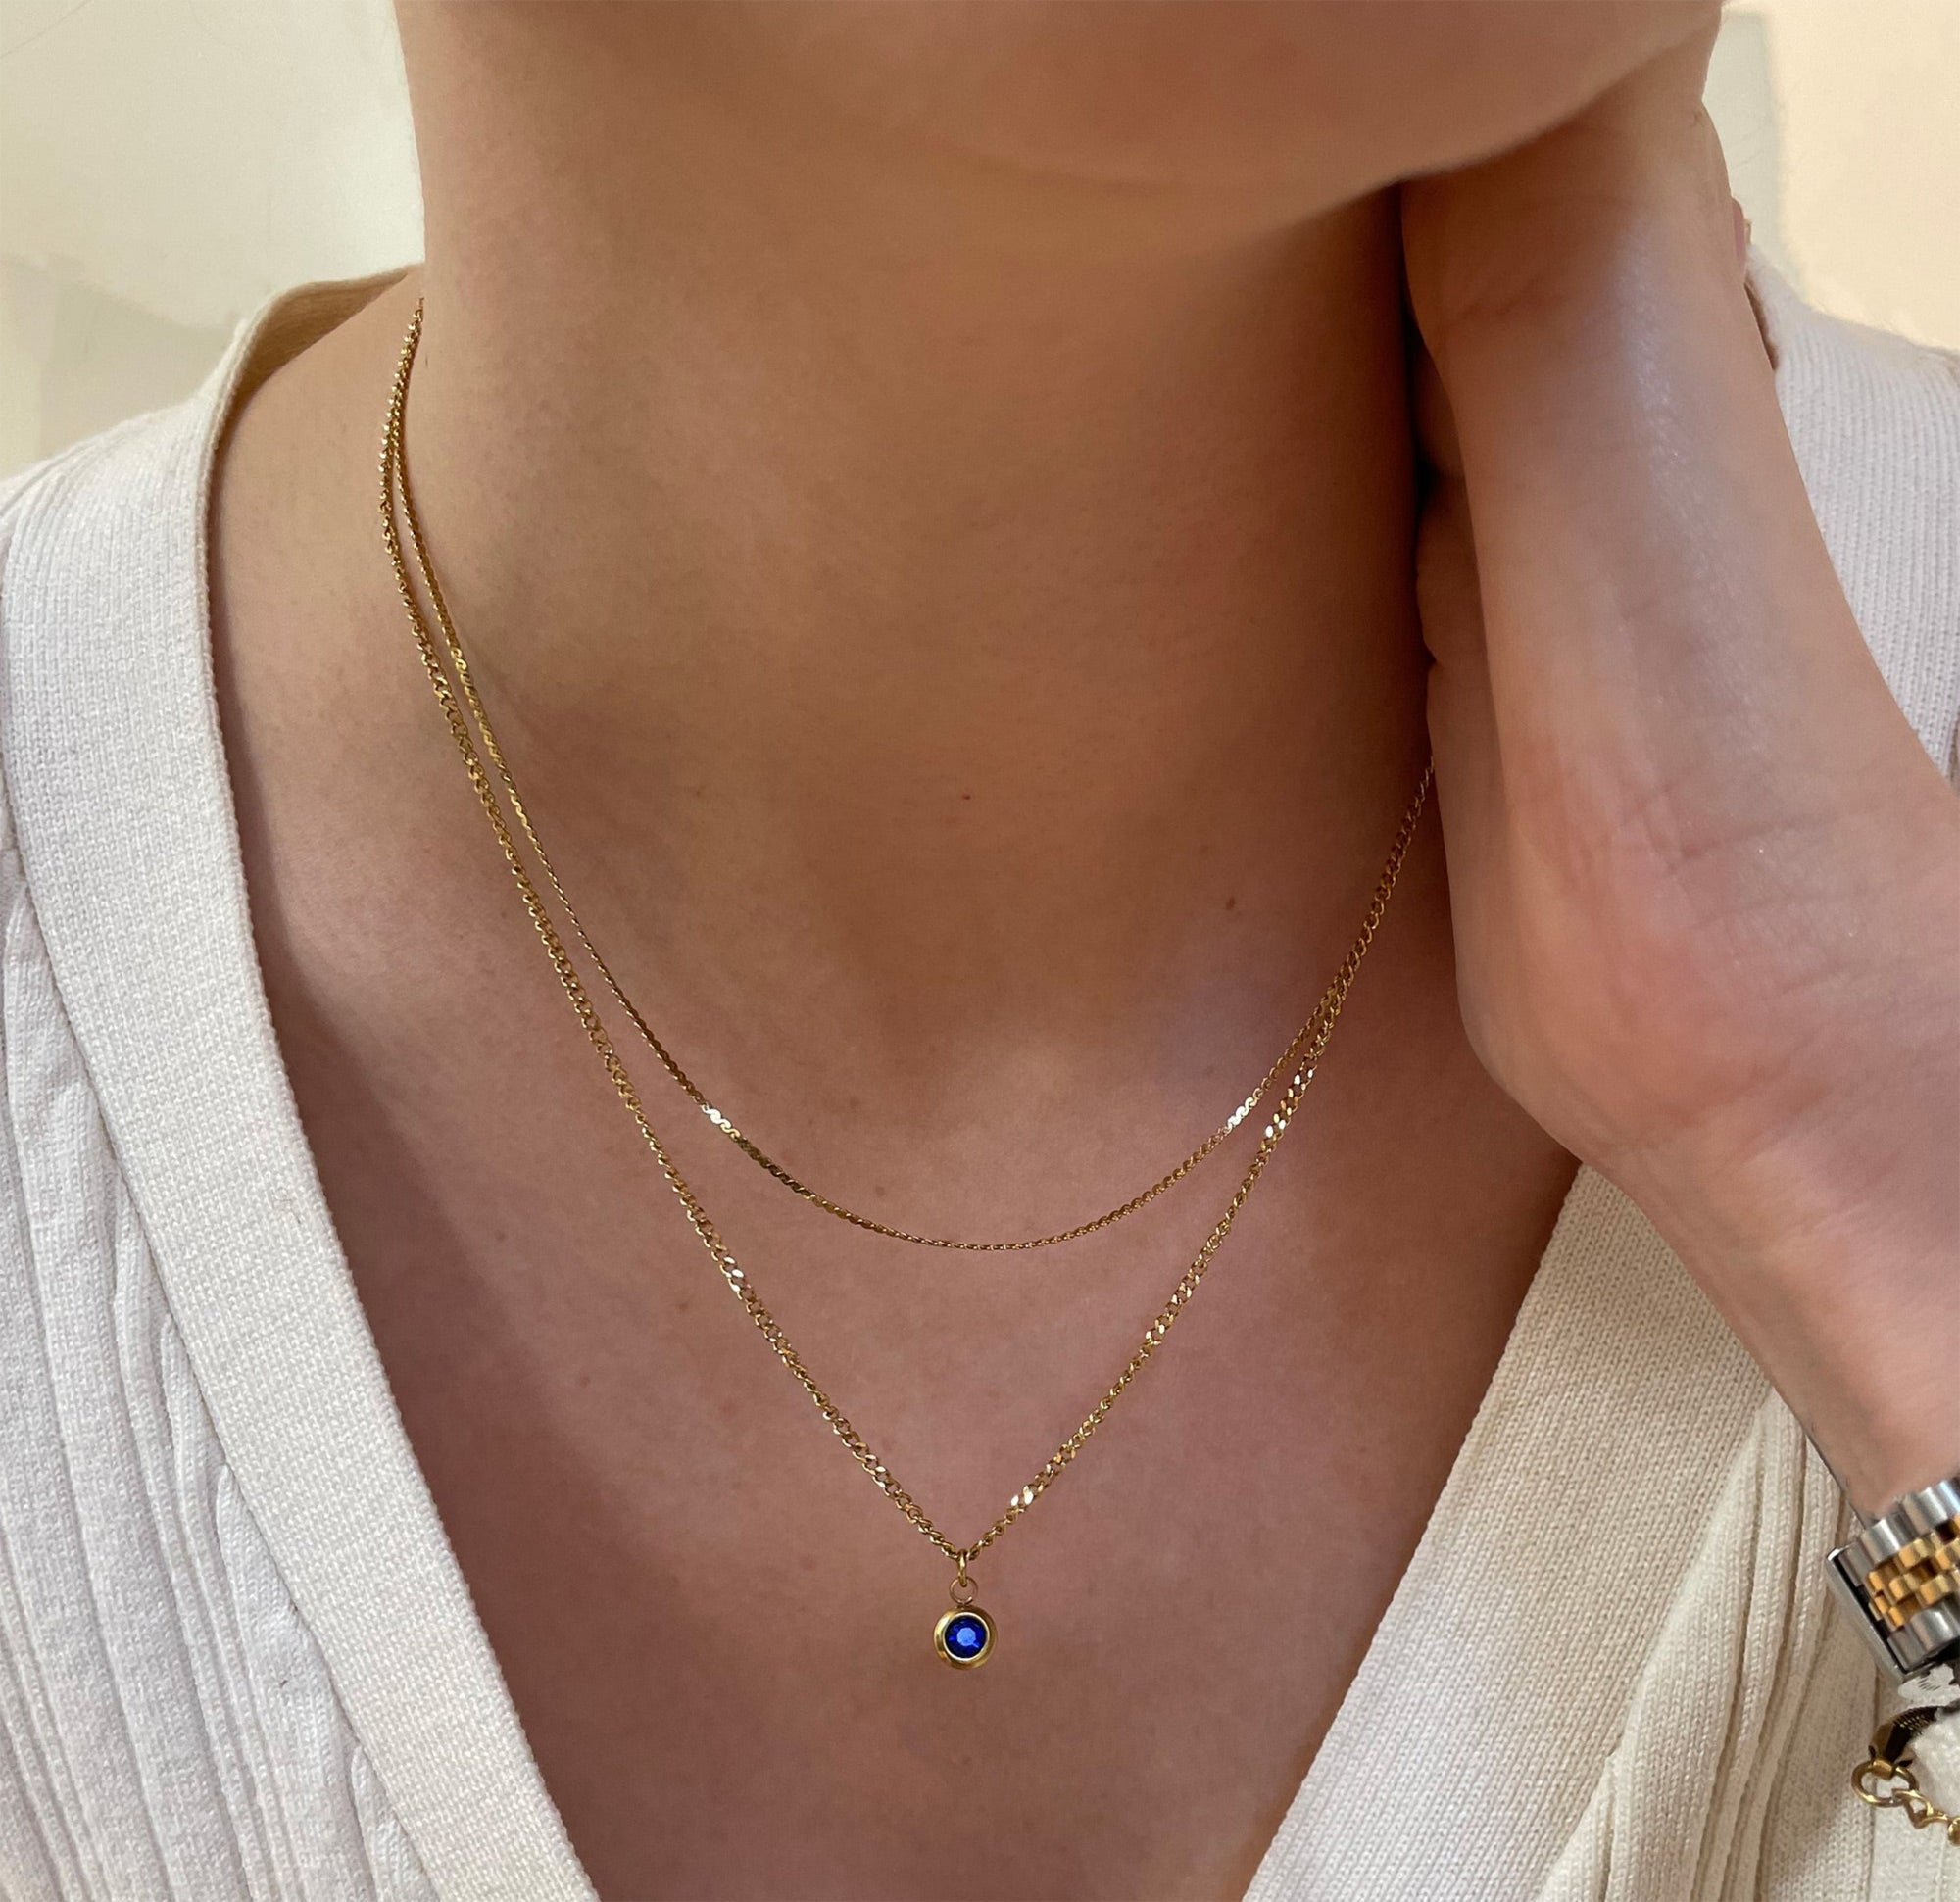 SAPPHIRE BIRTHSTONE NECKLACE WATER RESISTANT